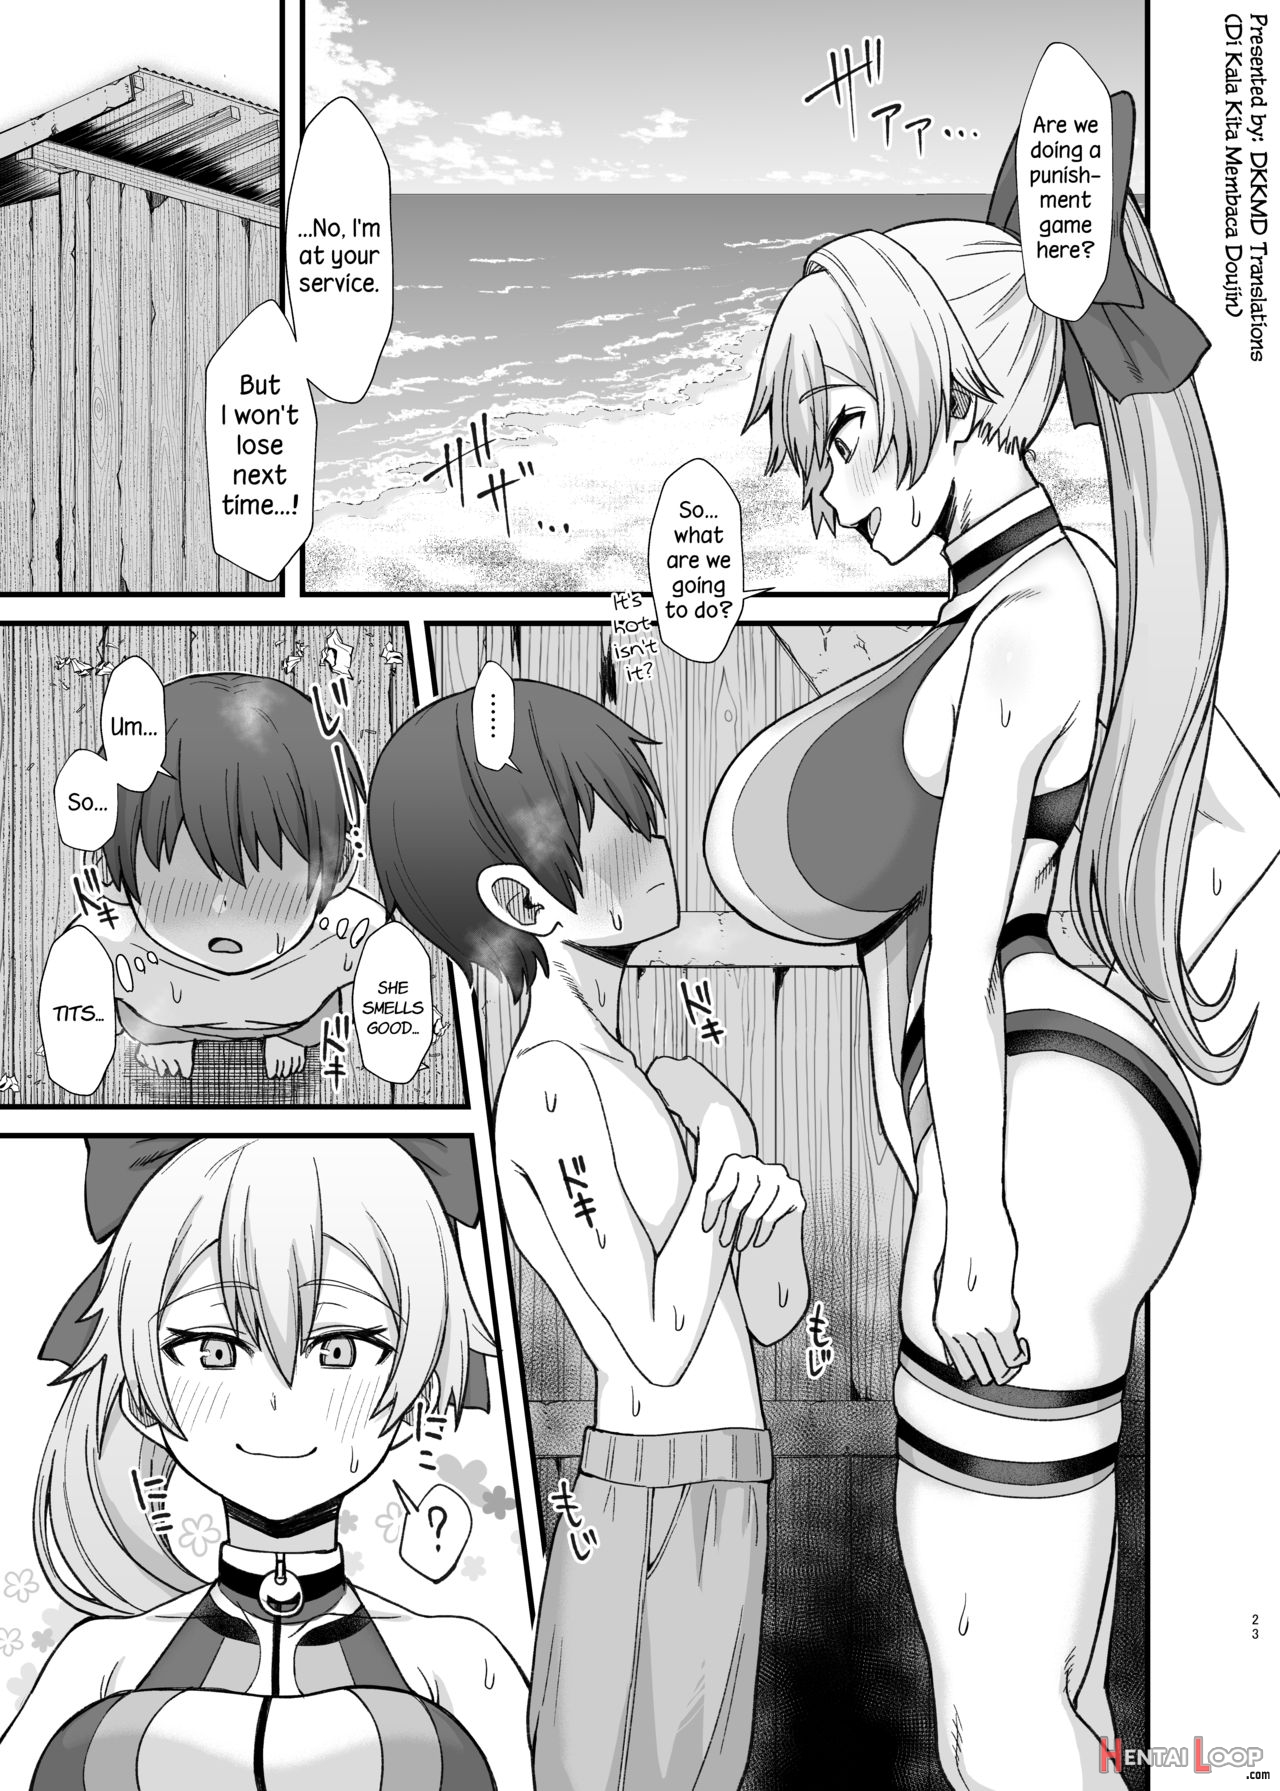 Shota Porn Black White - A Story Of Tomoe Gozen Being Punished By A Shota (by Butachang) - Hentai  doujinshi for free at HentaiLoop